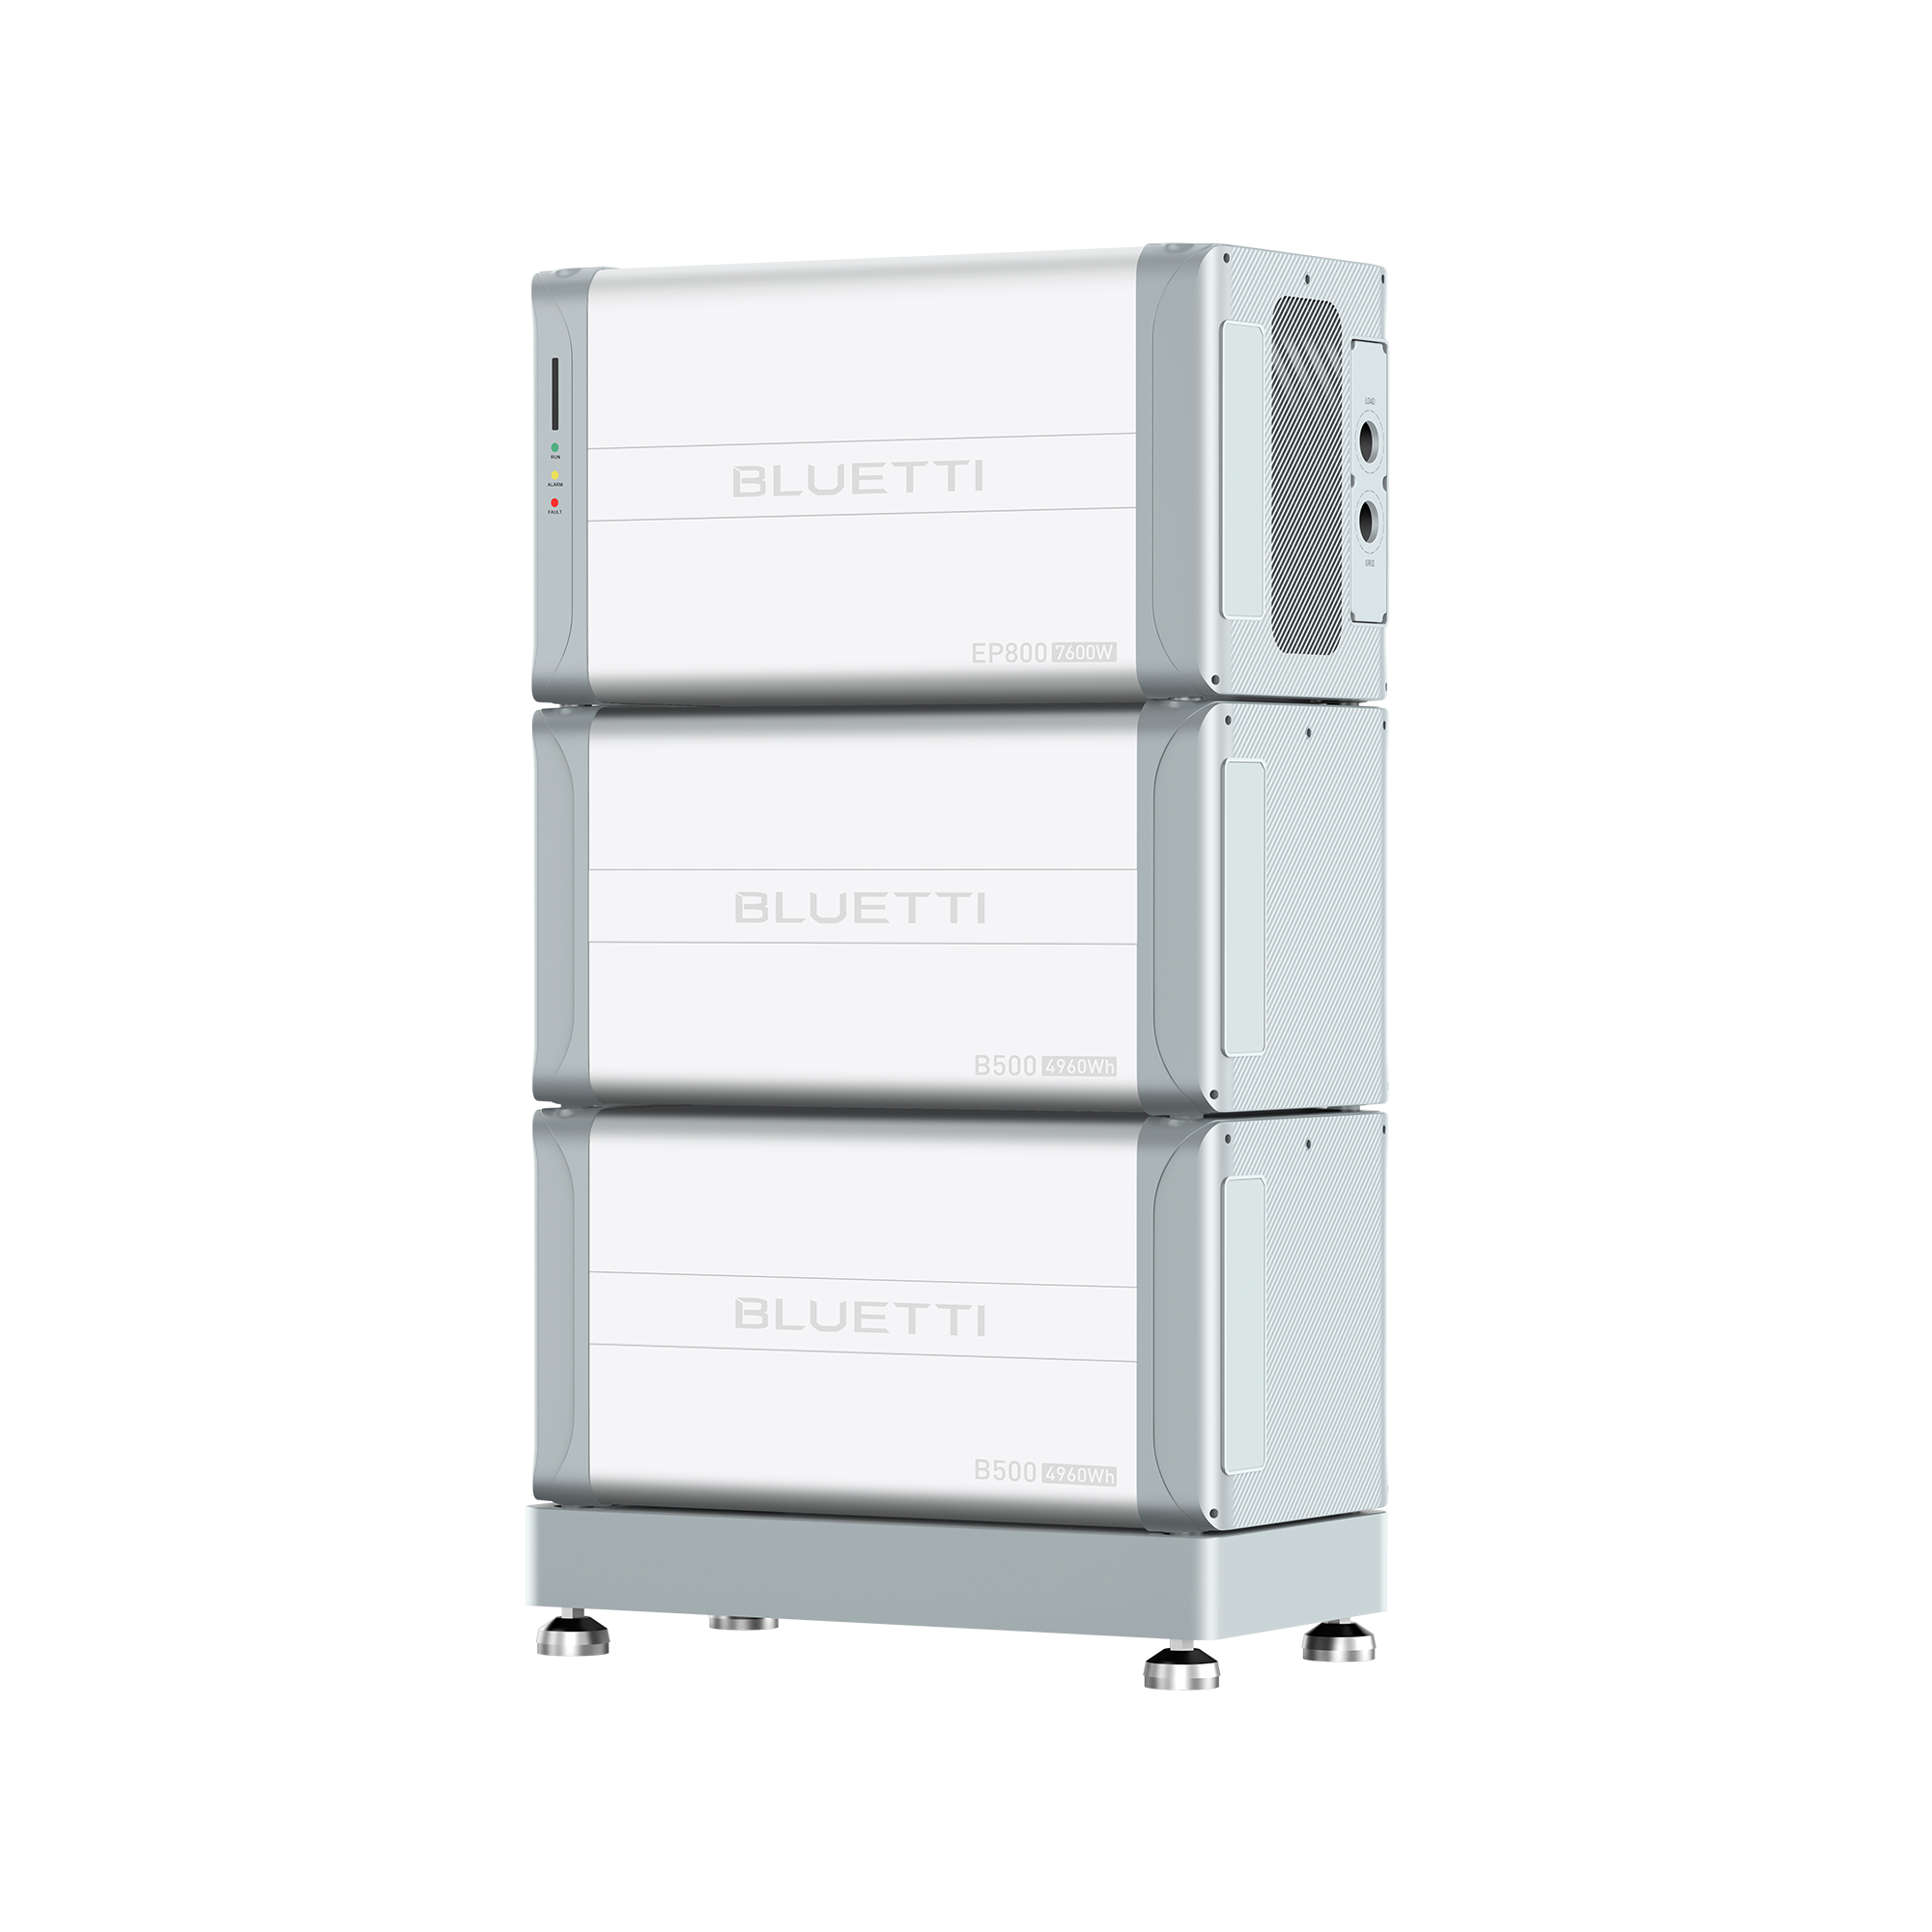 BLUETTI EP800 + B500 Home Battery Backup EP800+2*B500 / 9920Wh/7600W Off-grid Home Power